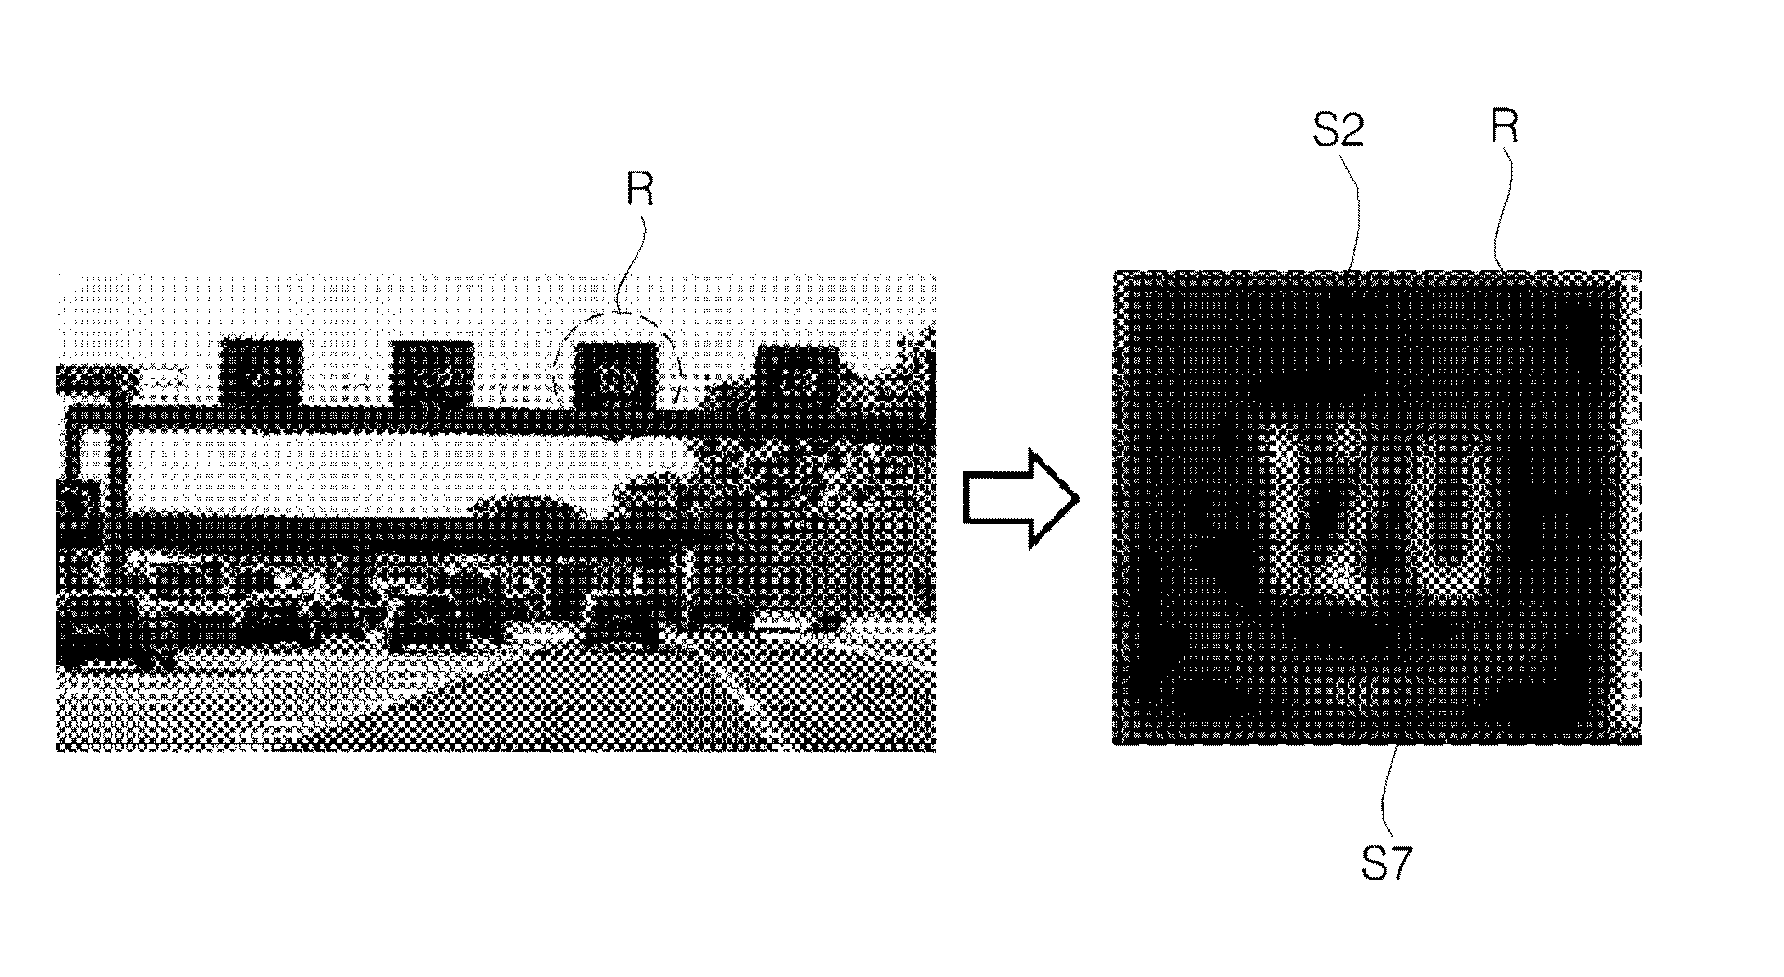 Traffic sign recognizing apparatus and operating method thereof